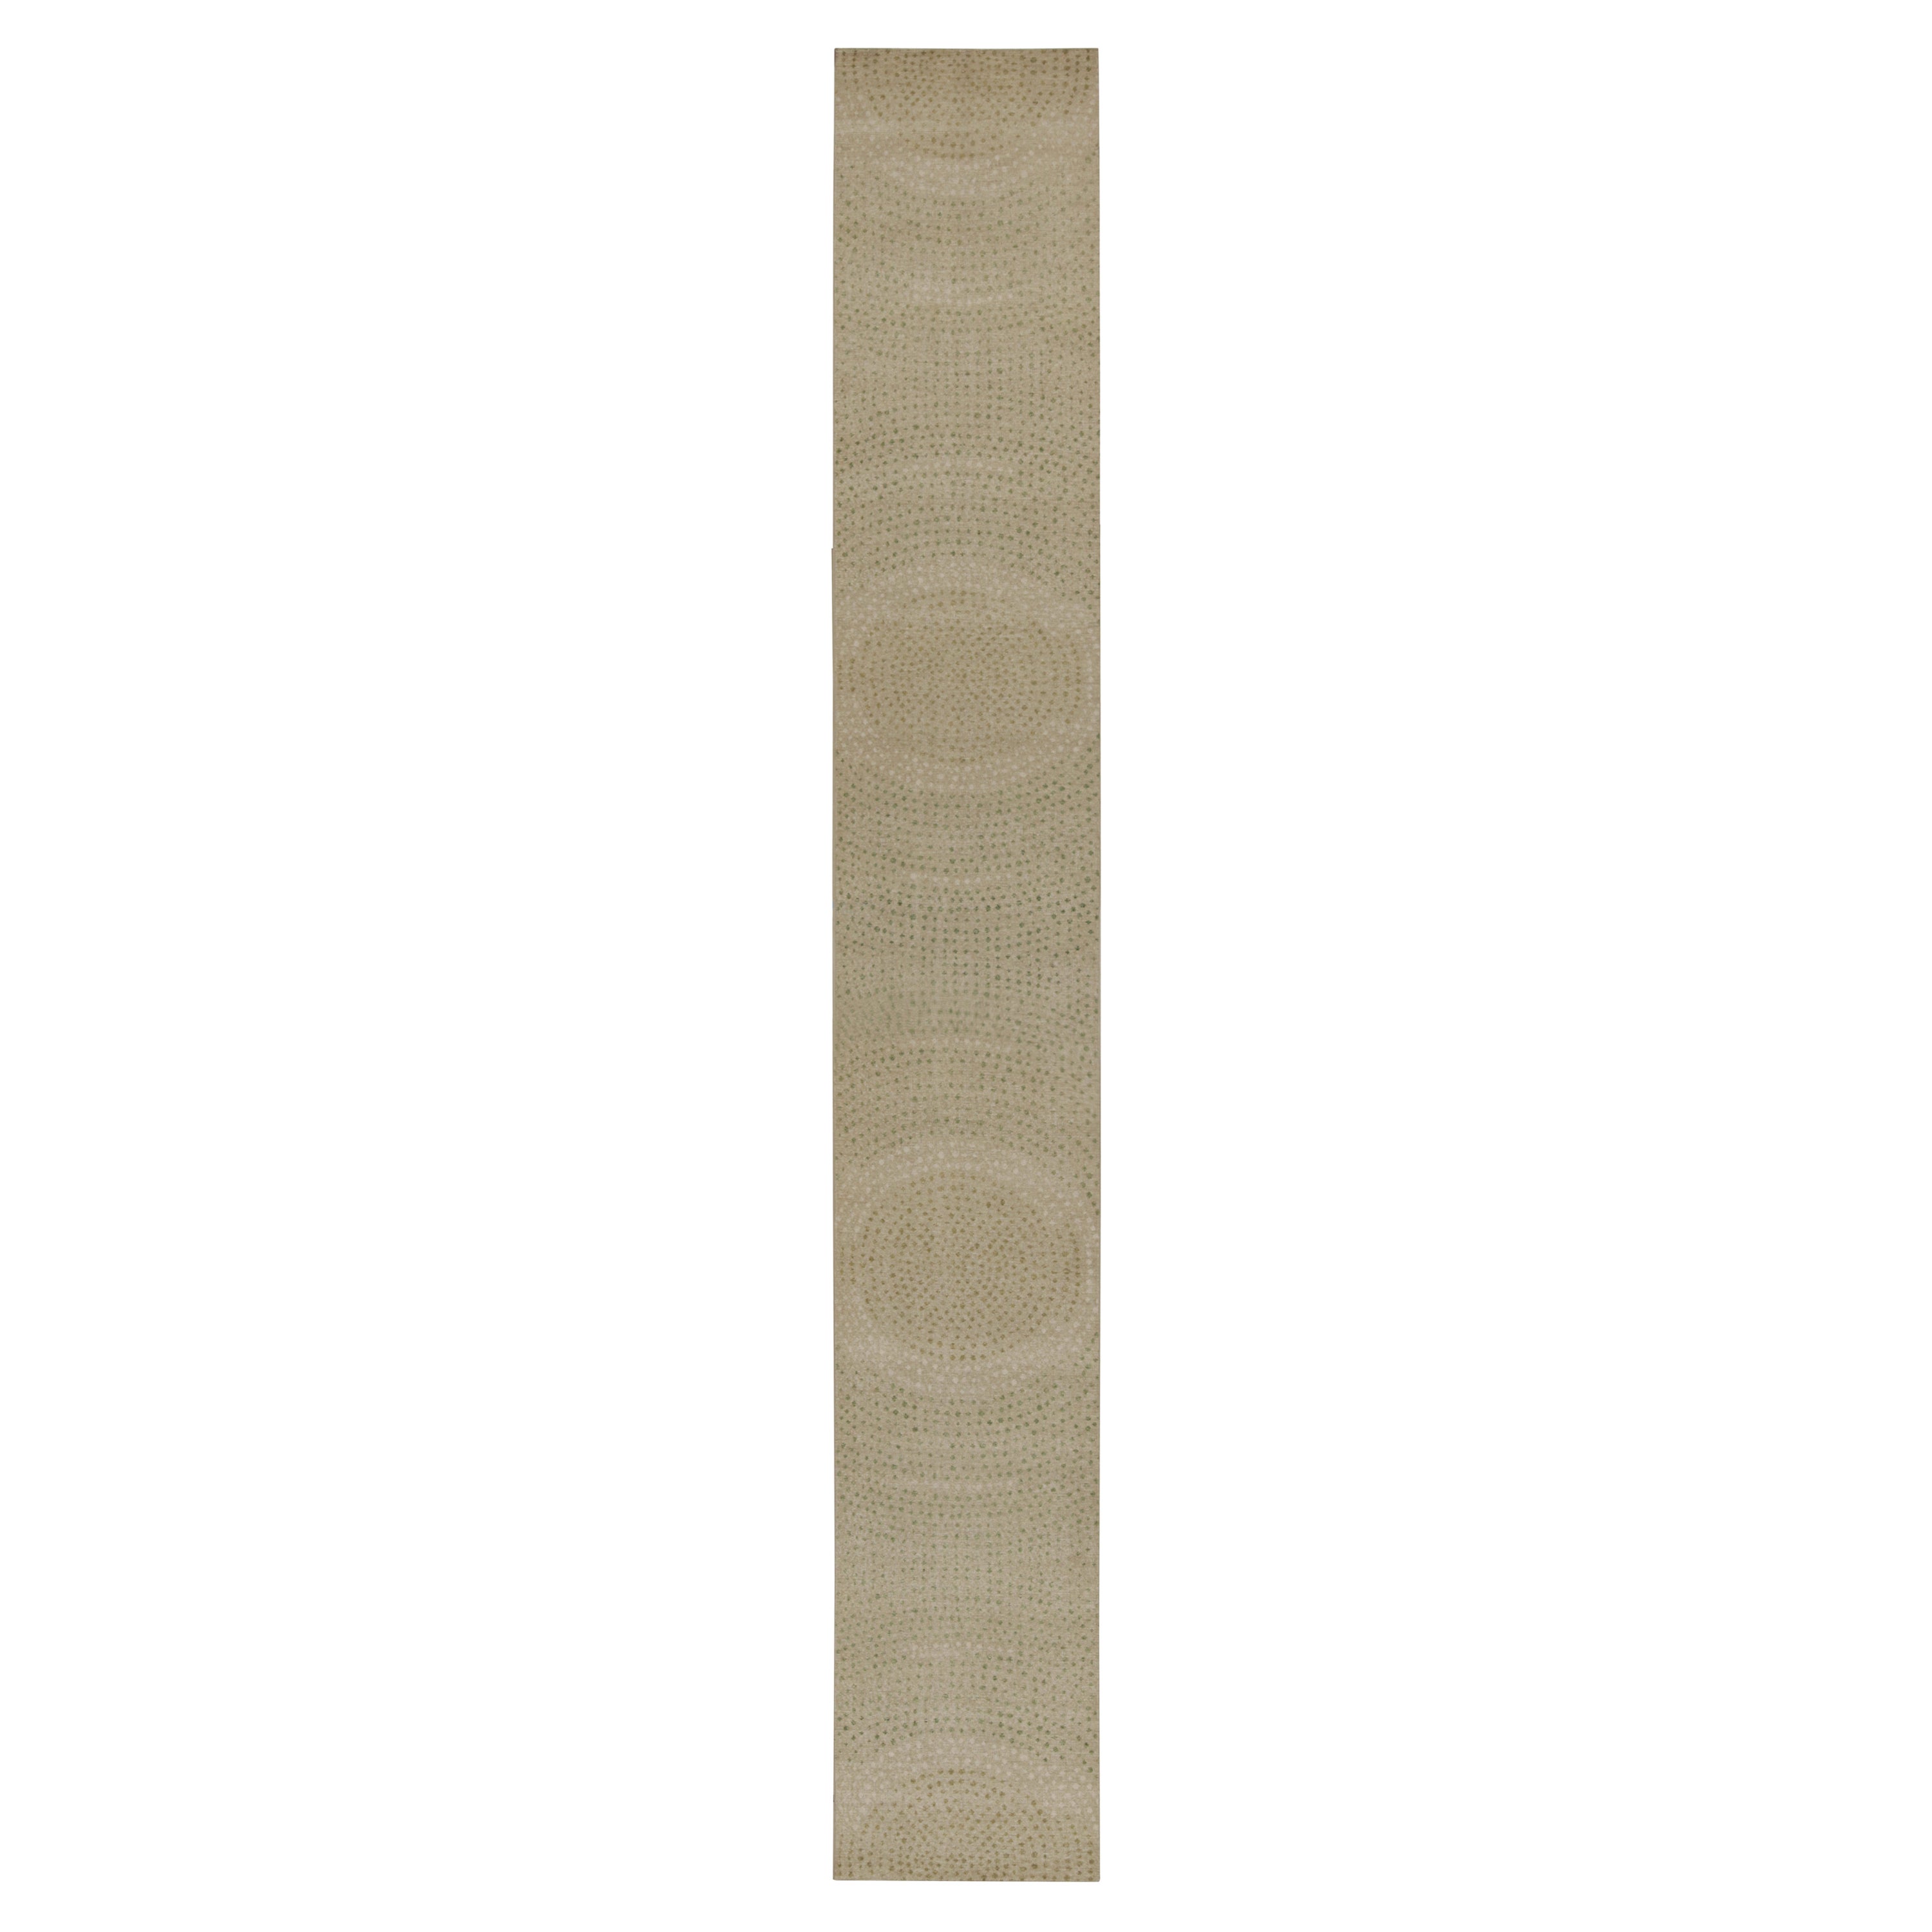 Rug & Kilim’s Distressed Style Extra-Long Runner in Beige with Green Dot Pattern